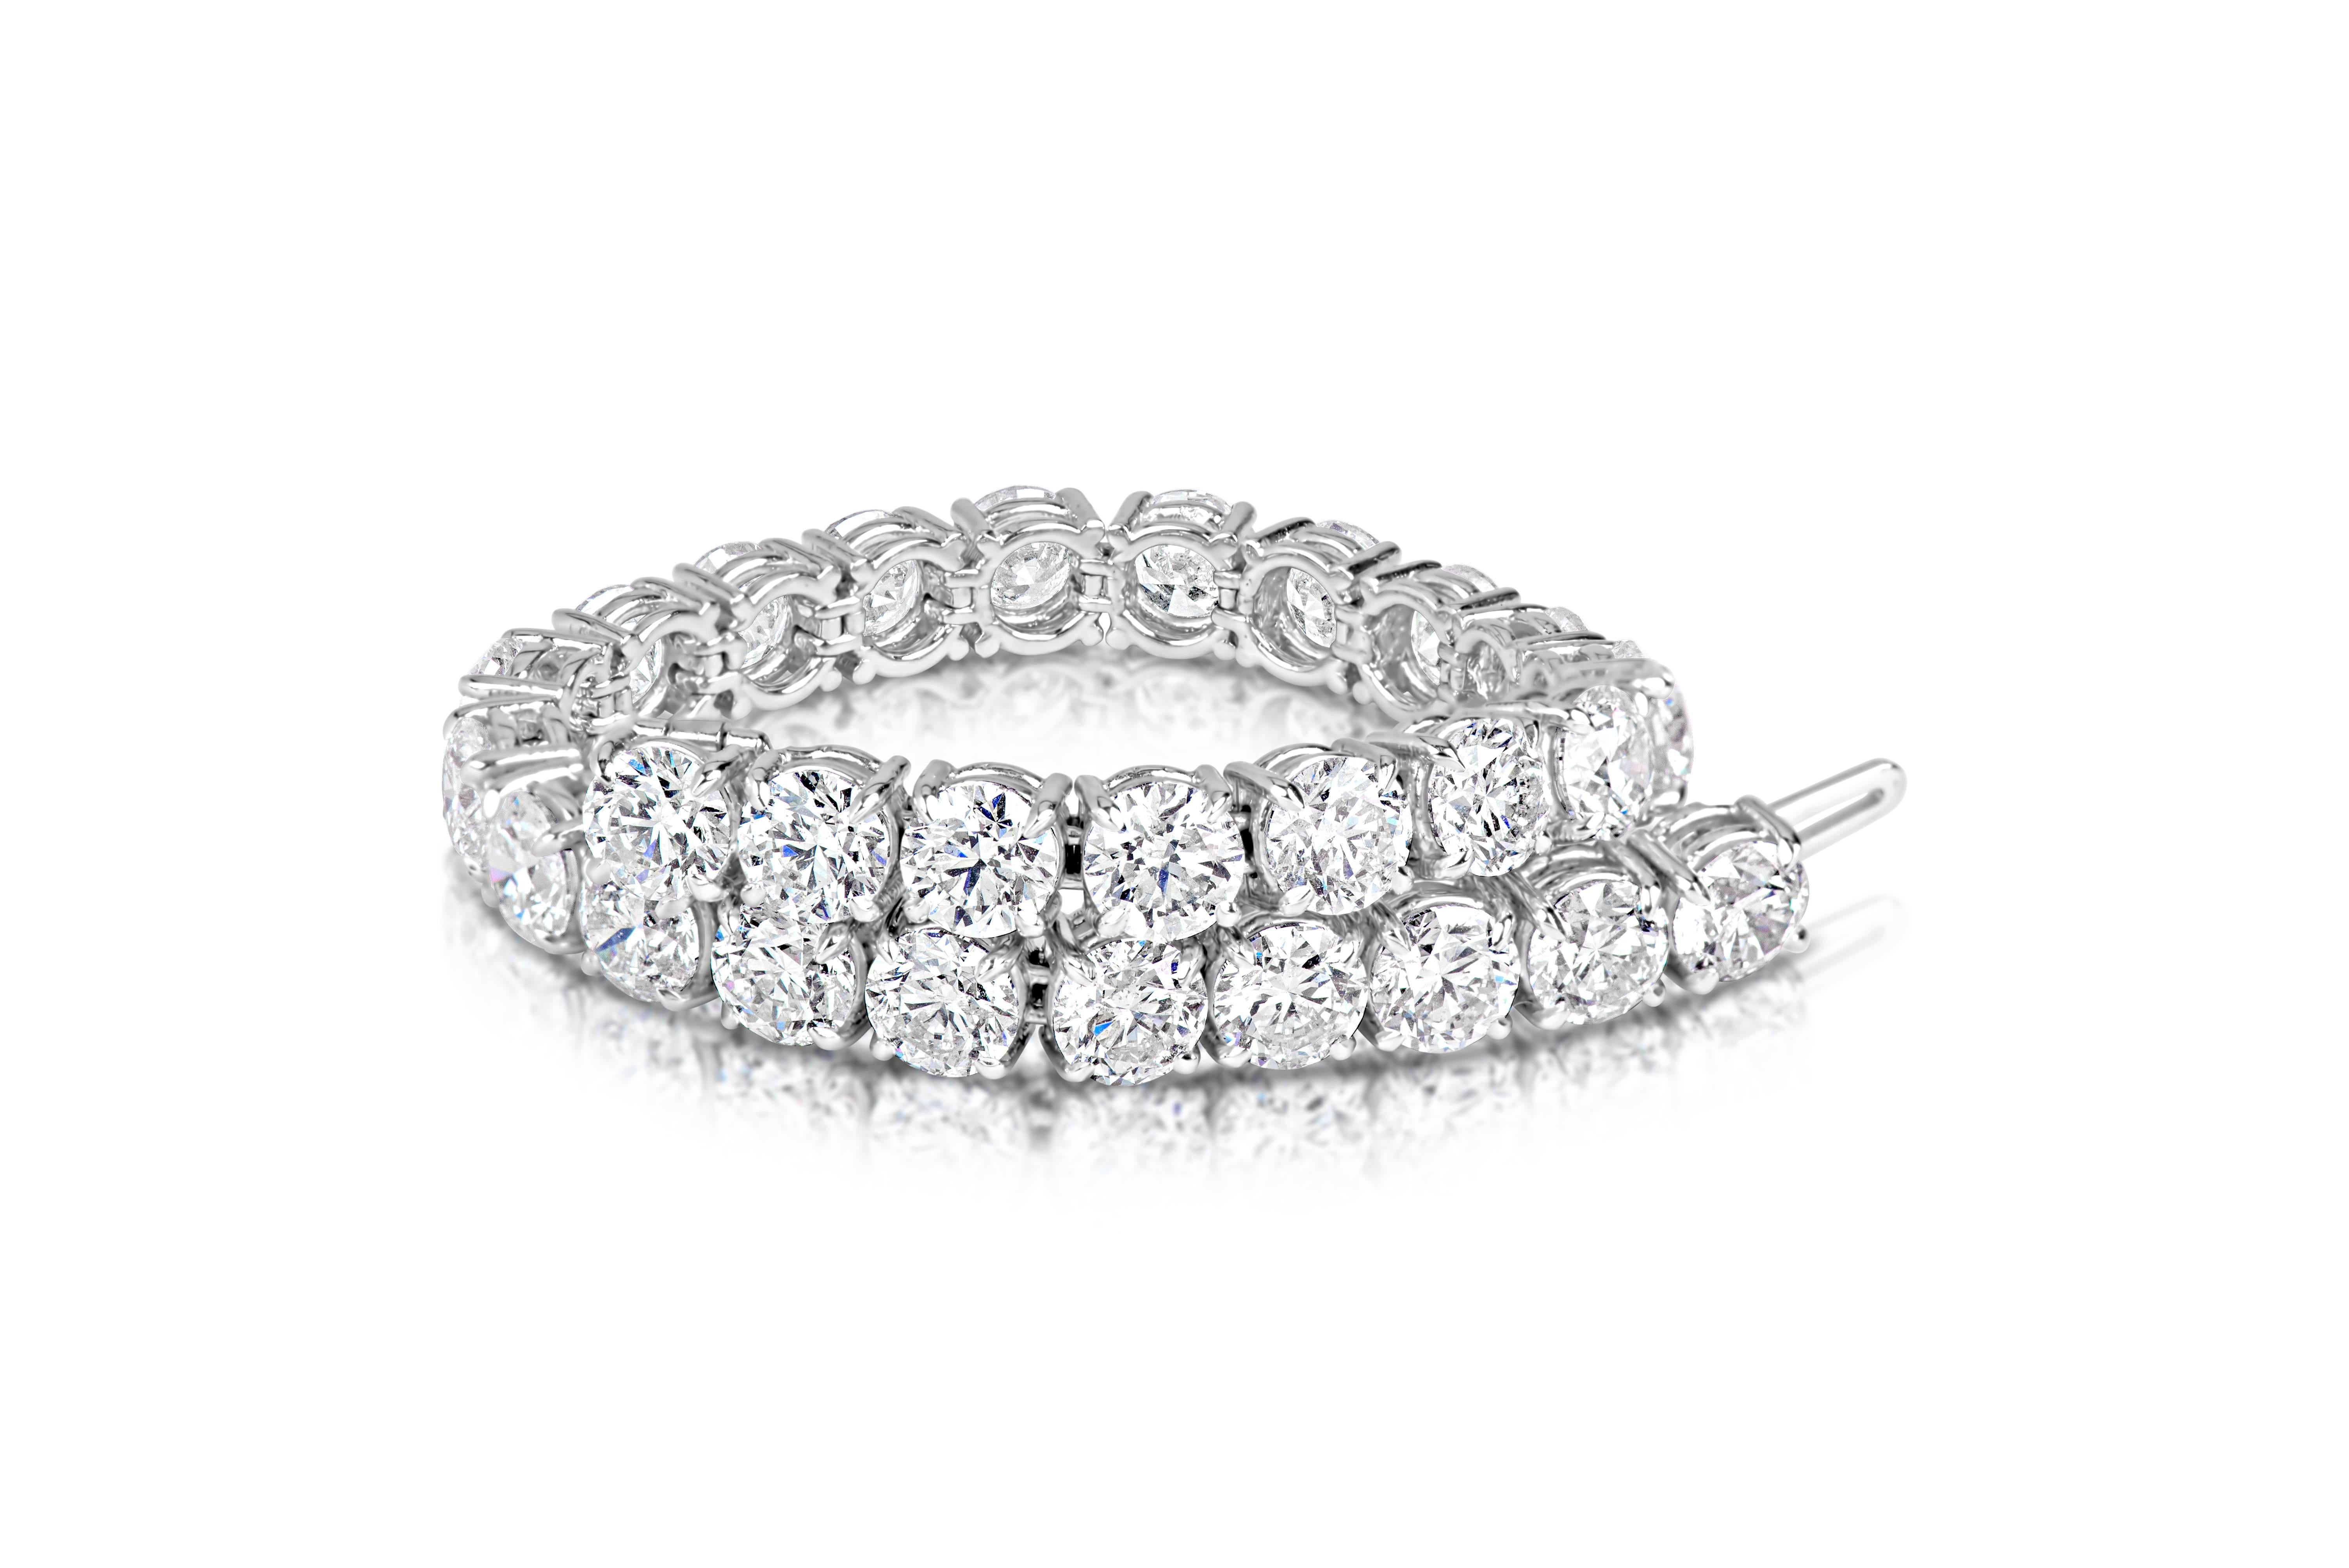 This One of a Kind Bracelet Features:

Diamond Count: 30 Diamond
Diamond Weight: 21.82 Cts
Color: H-I
Clarity: SI2-SI3
18K White Gold

All Stones have been hand selected and beautifully matched to achieve  high brilliancy and they are all eye